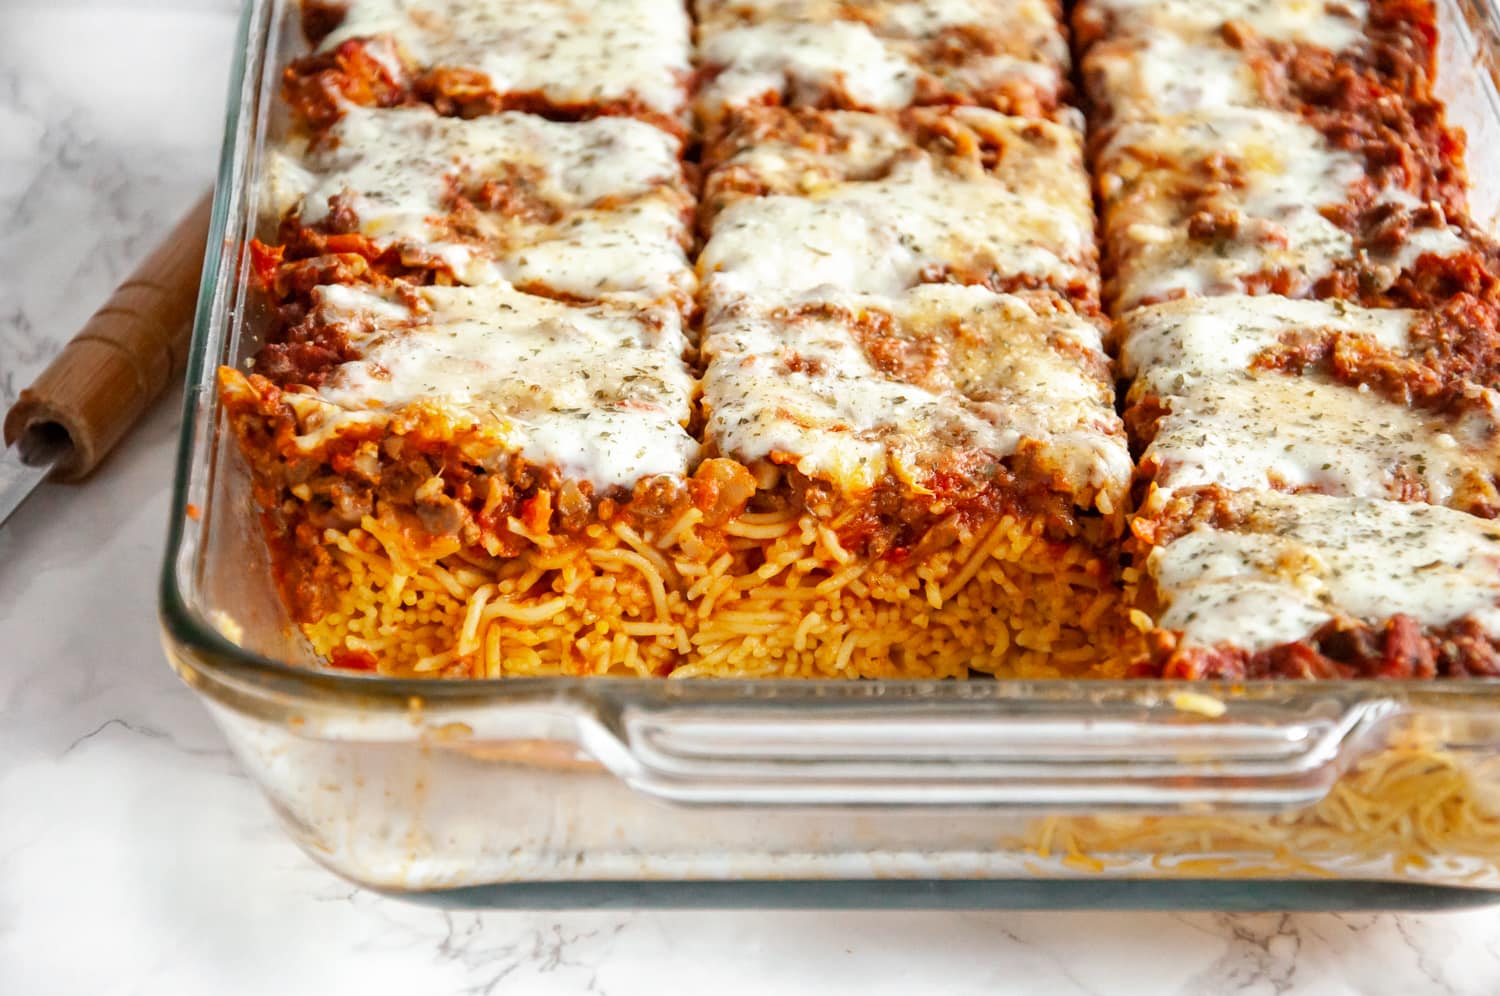 sliced baked spaghetti in a glass baking dish